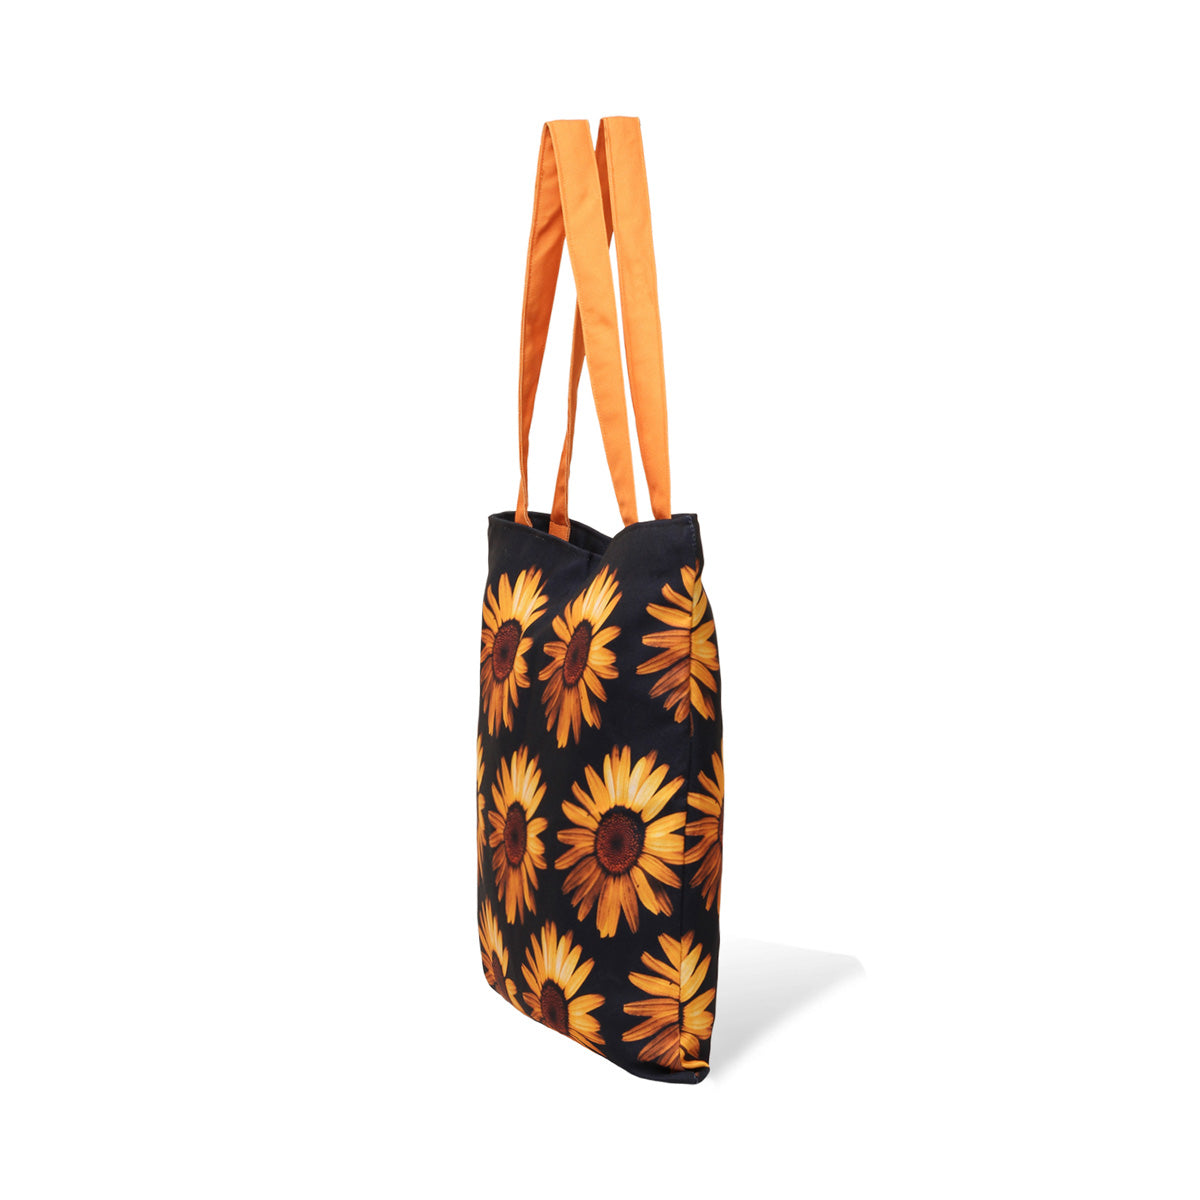 Side view of Black and orange tote bag featuring vibrant sunflowers.